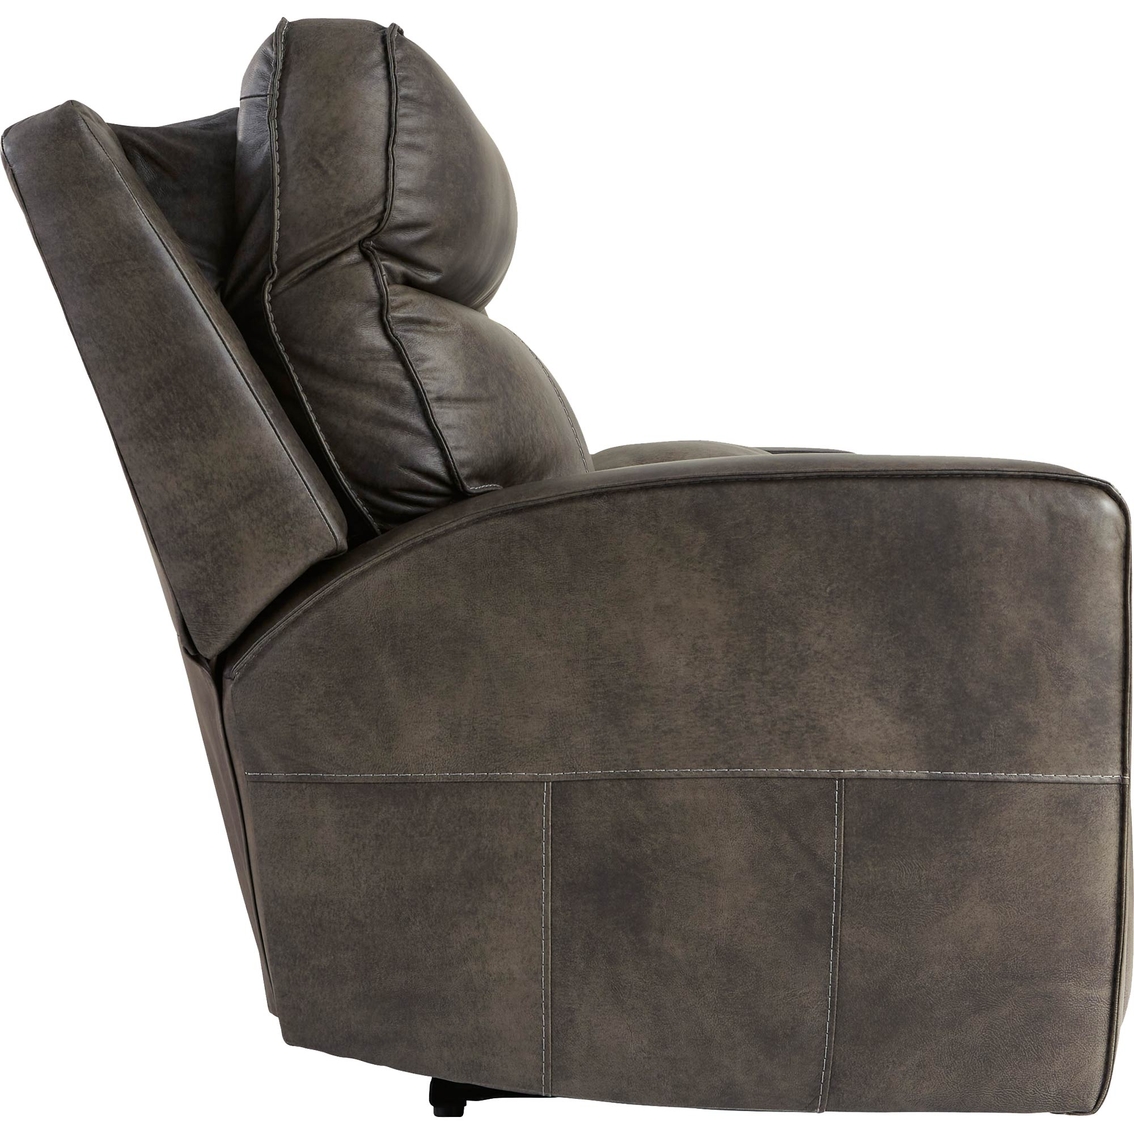 Signature Design by Ashley Game Plan Power Reclining Loveseat - Image 3 of 9